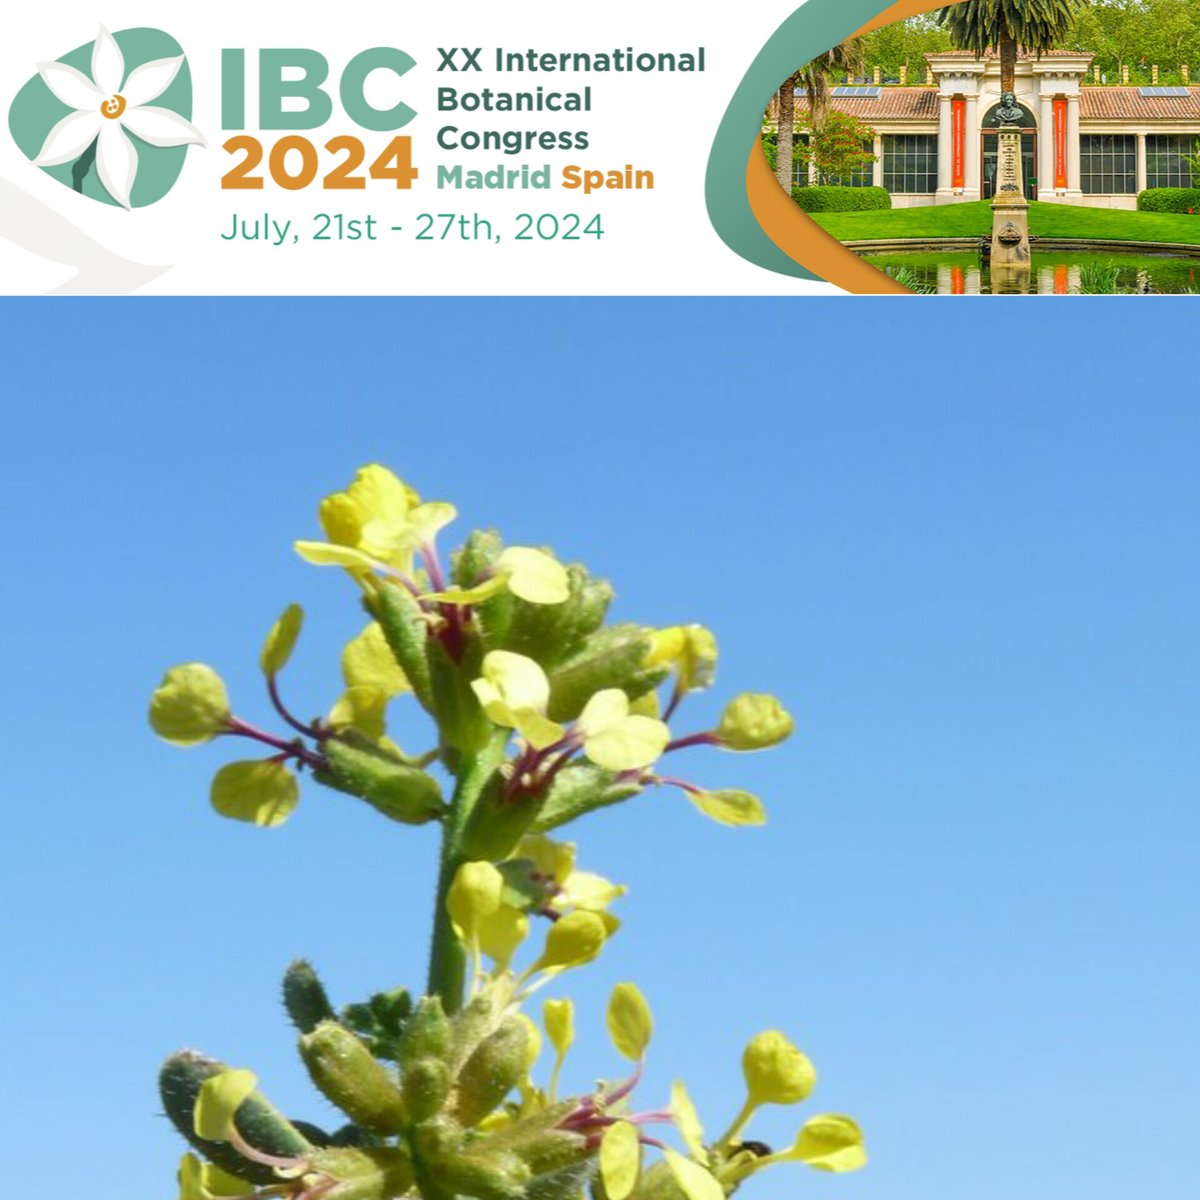 IBC-2024
International Botanical Congress 
July 21-27, 2024, Madrid Spain

Call of Abstract extended until December 8th!!!
@ibc2024 
For more details & Registration 
ibcmadrid2024.com/index.php